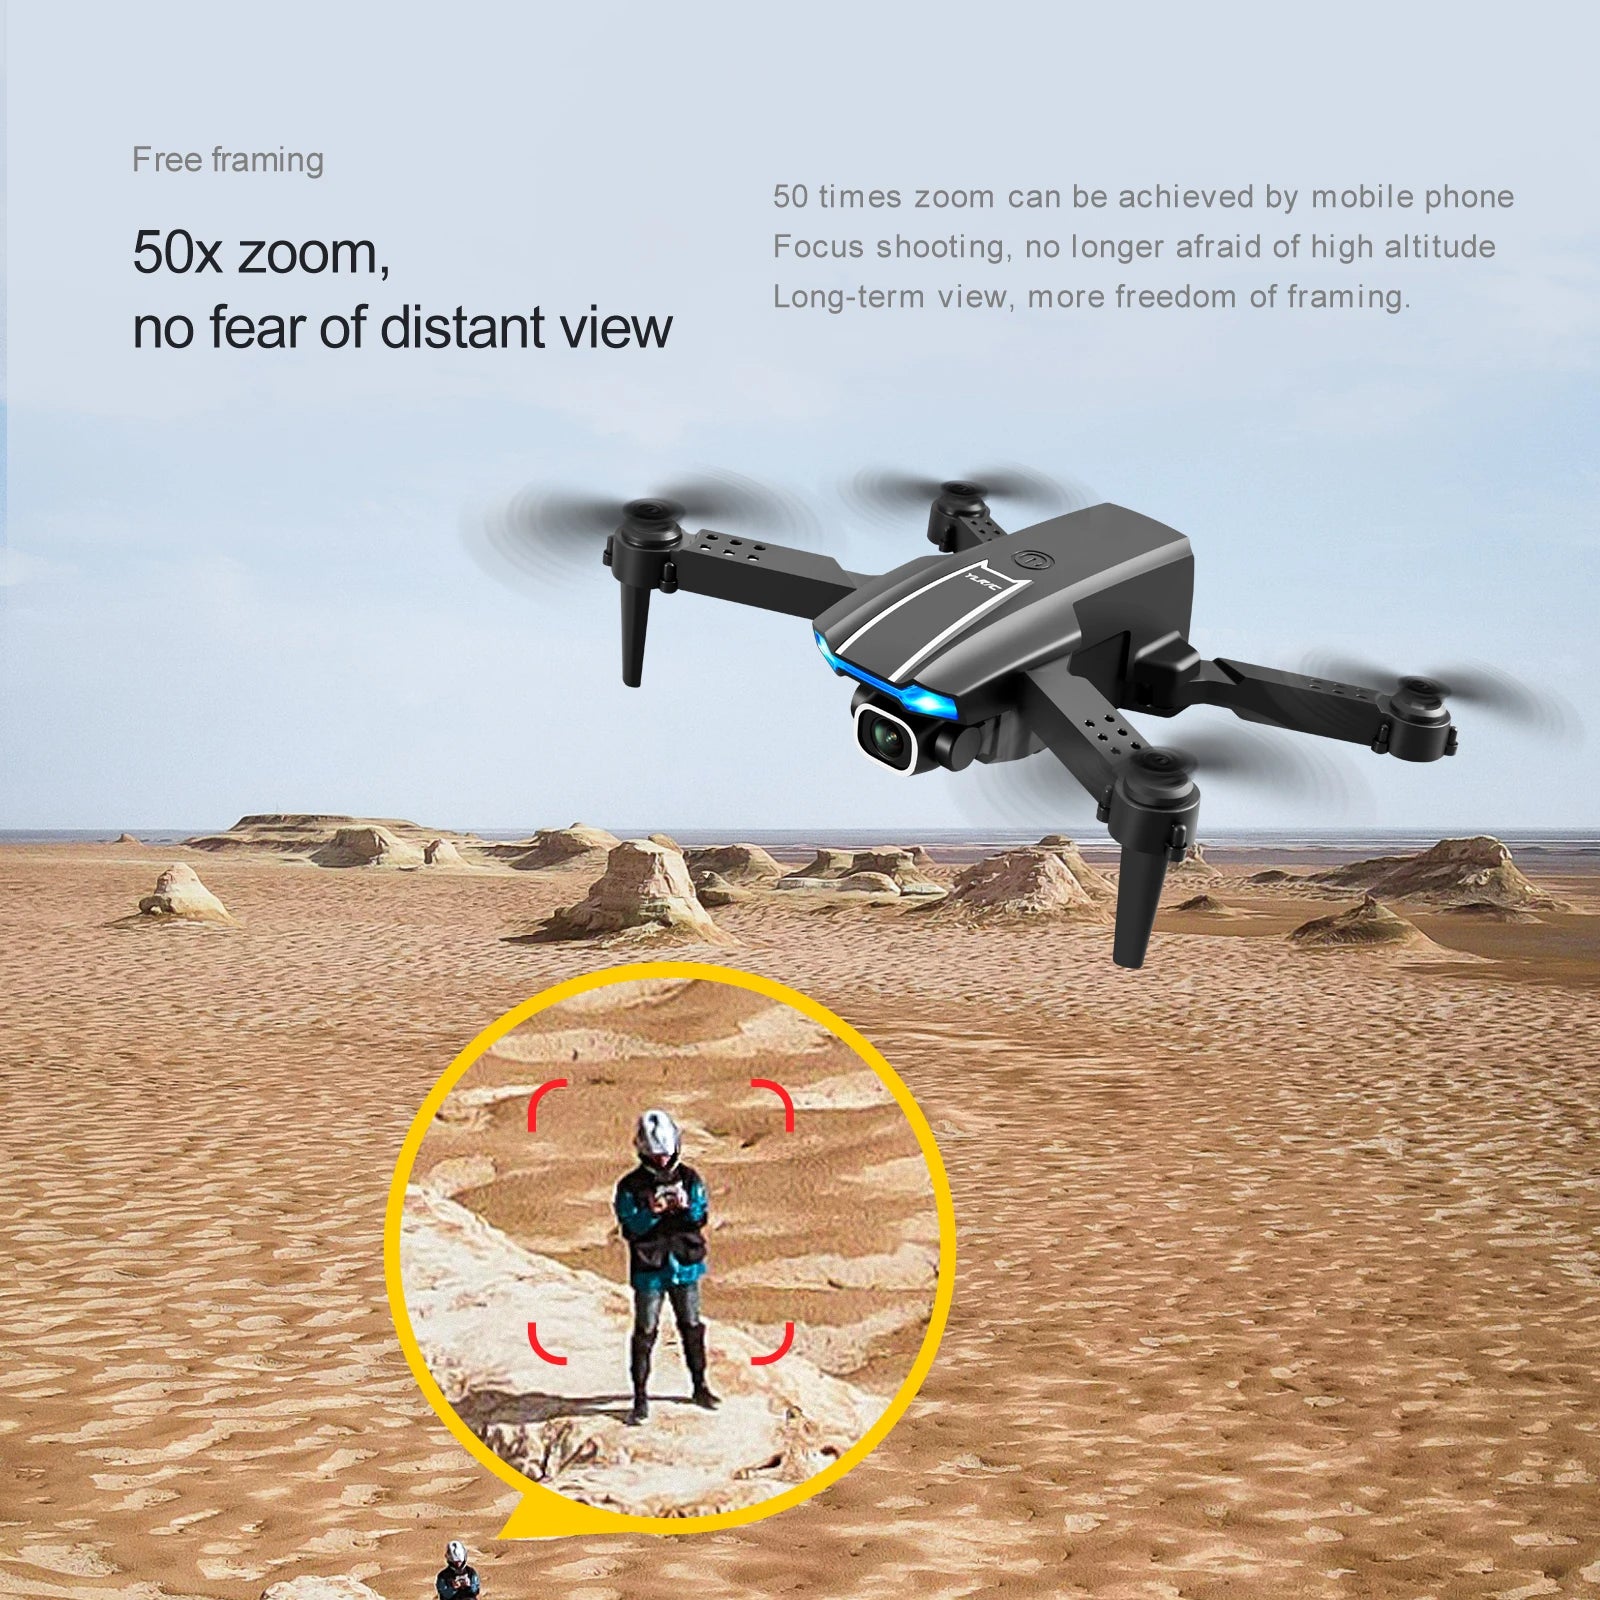 KBDFA S65 4K Mini Drone, free framing 50 times zoom can be achieved by mobile phone 50